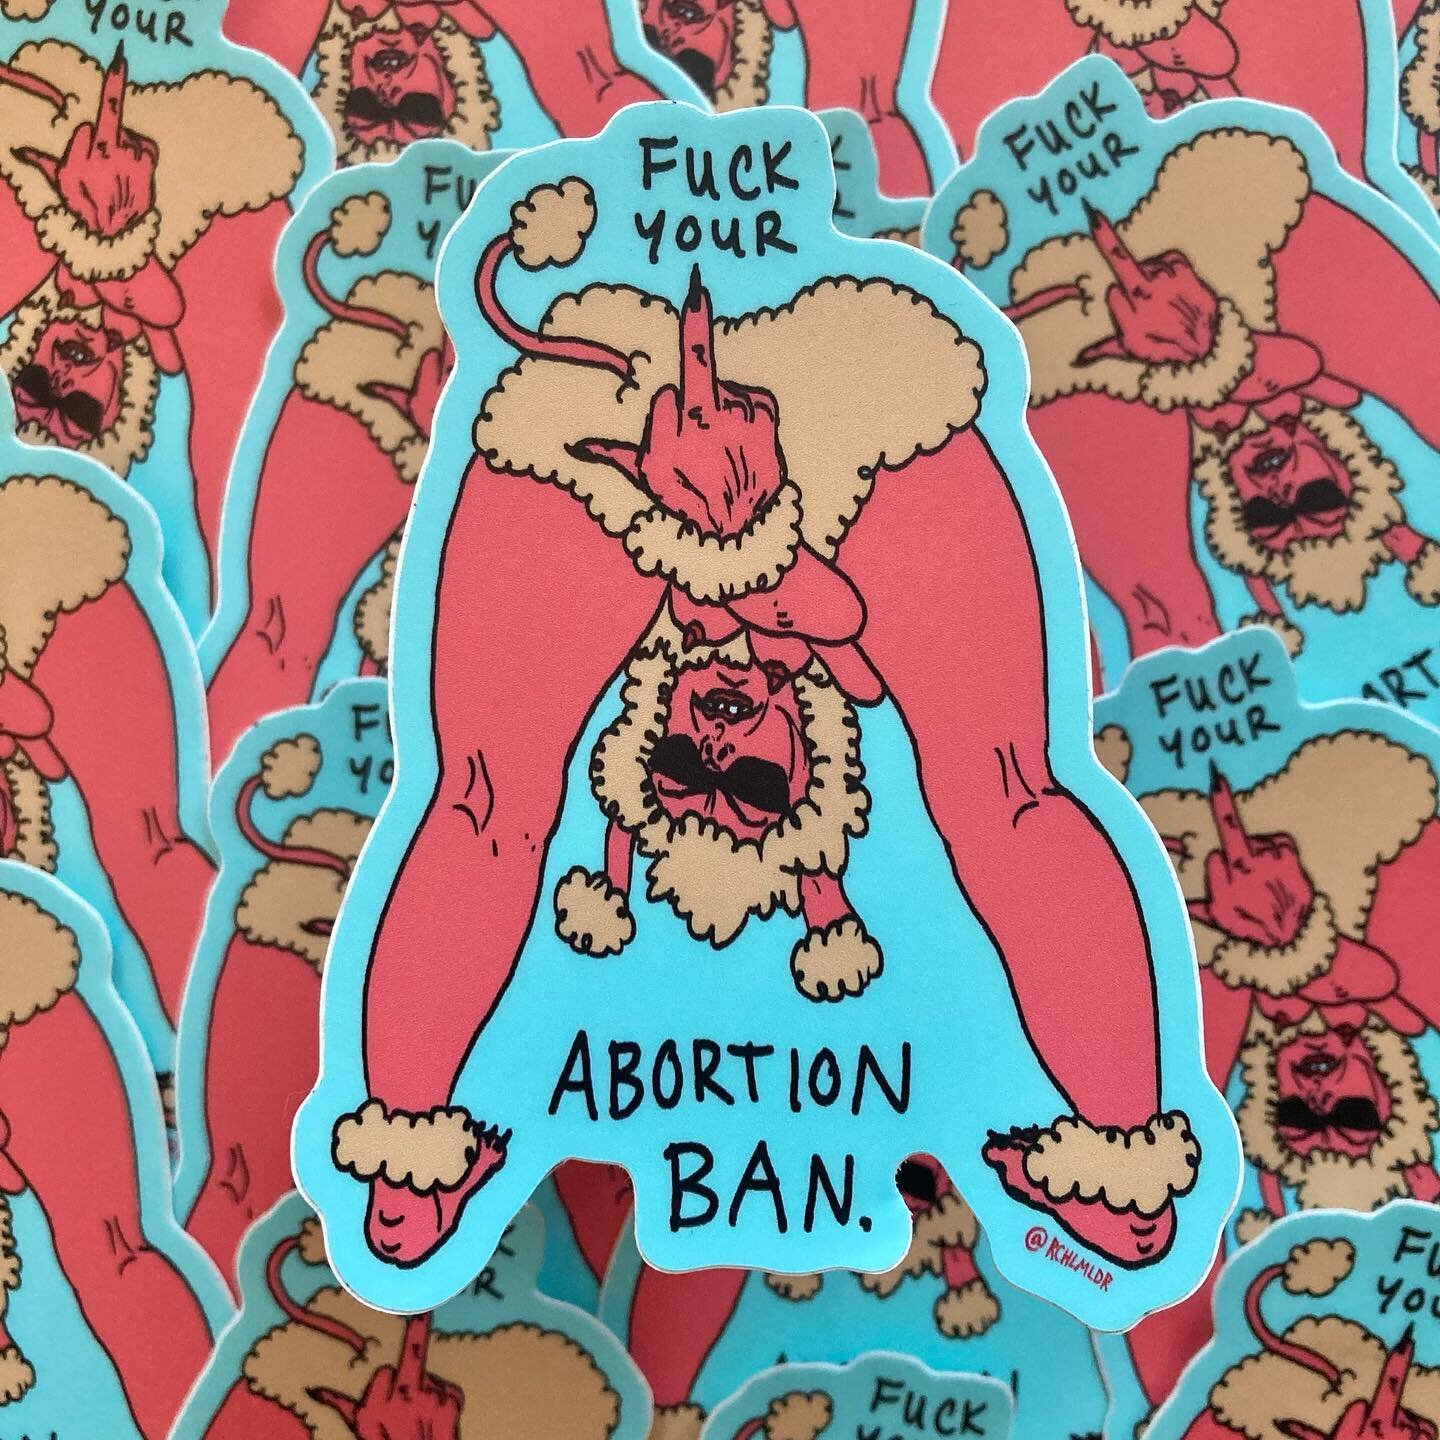 sticker fundraiser continues: this month half of all proceeds will be donated to @carolinaabortionfund! thanks to @yellowfund for this urgent call to action. 

stickers are available in my shop and at @groverscuriosityshop! 

#FuckYourAbortionBan 🐩?